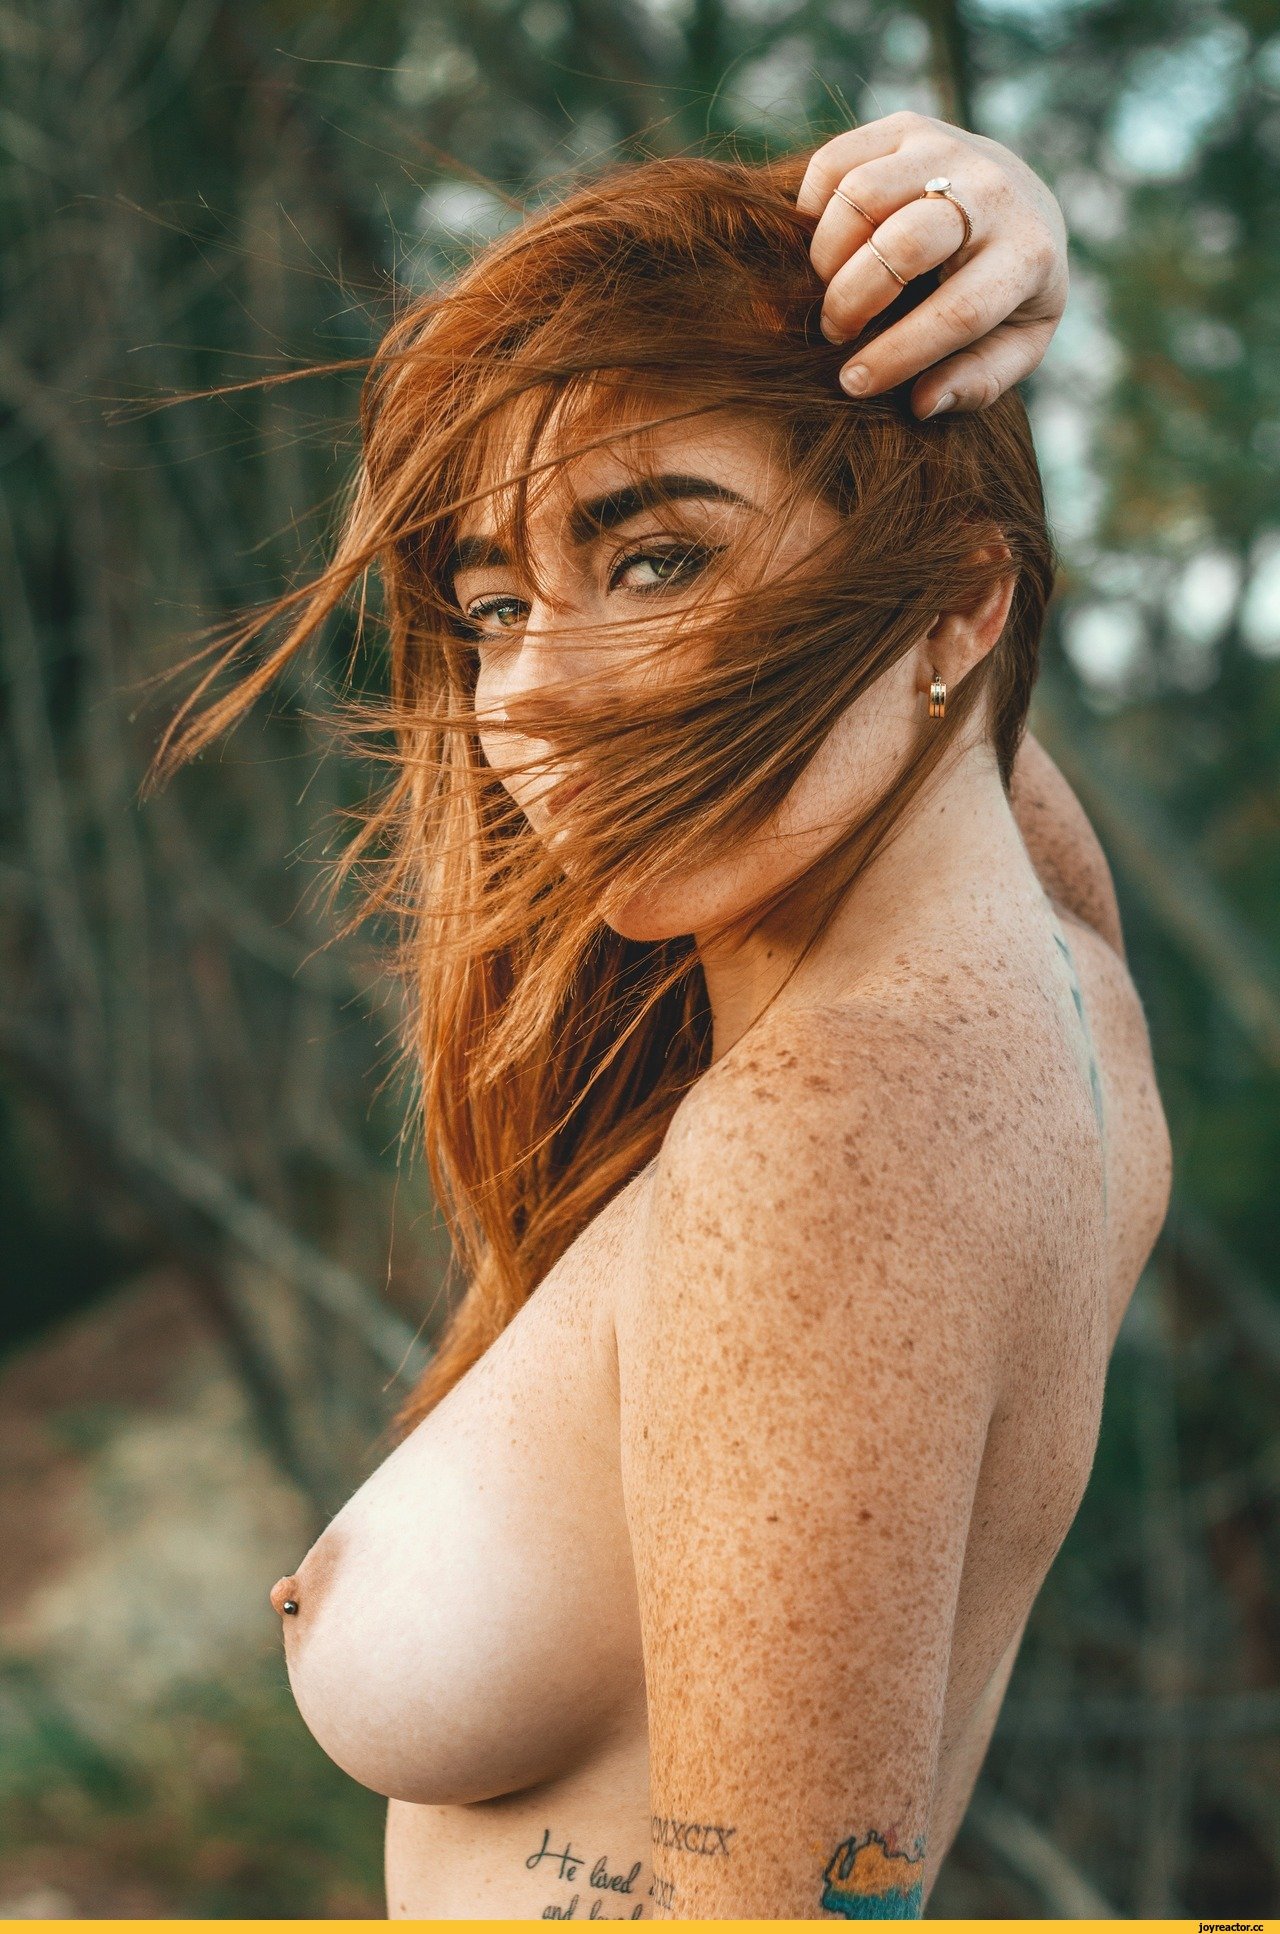 Nude Freckled Woman image image